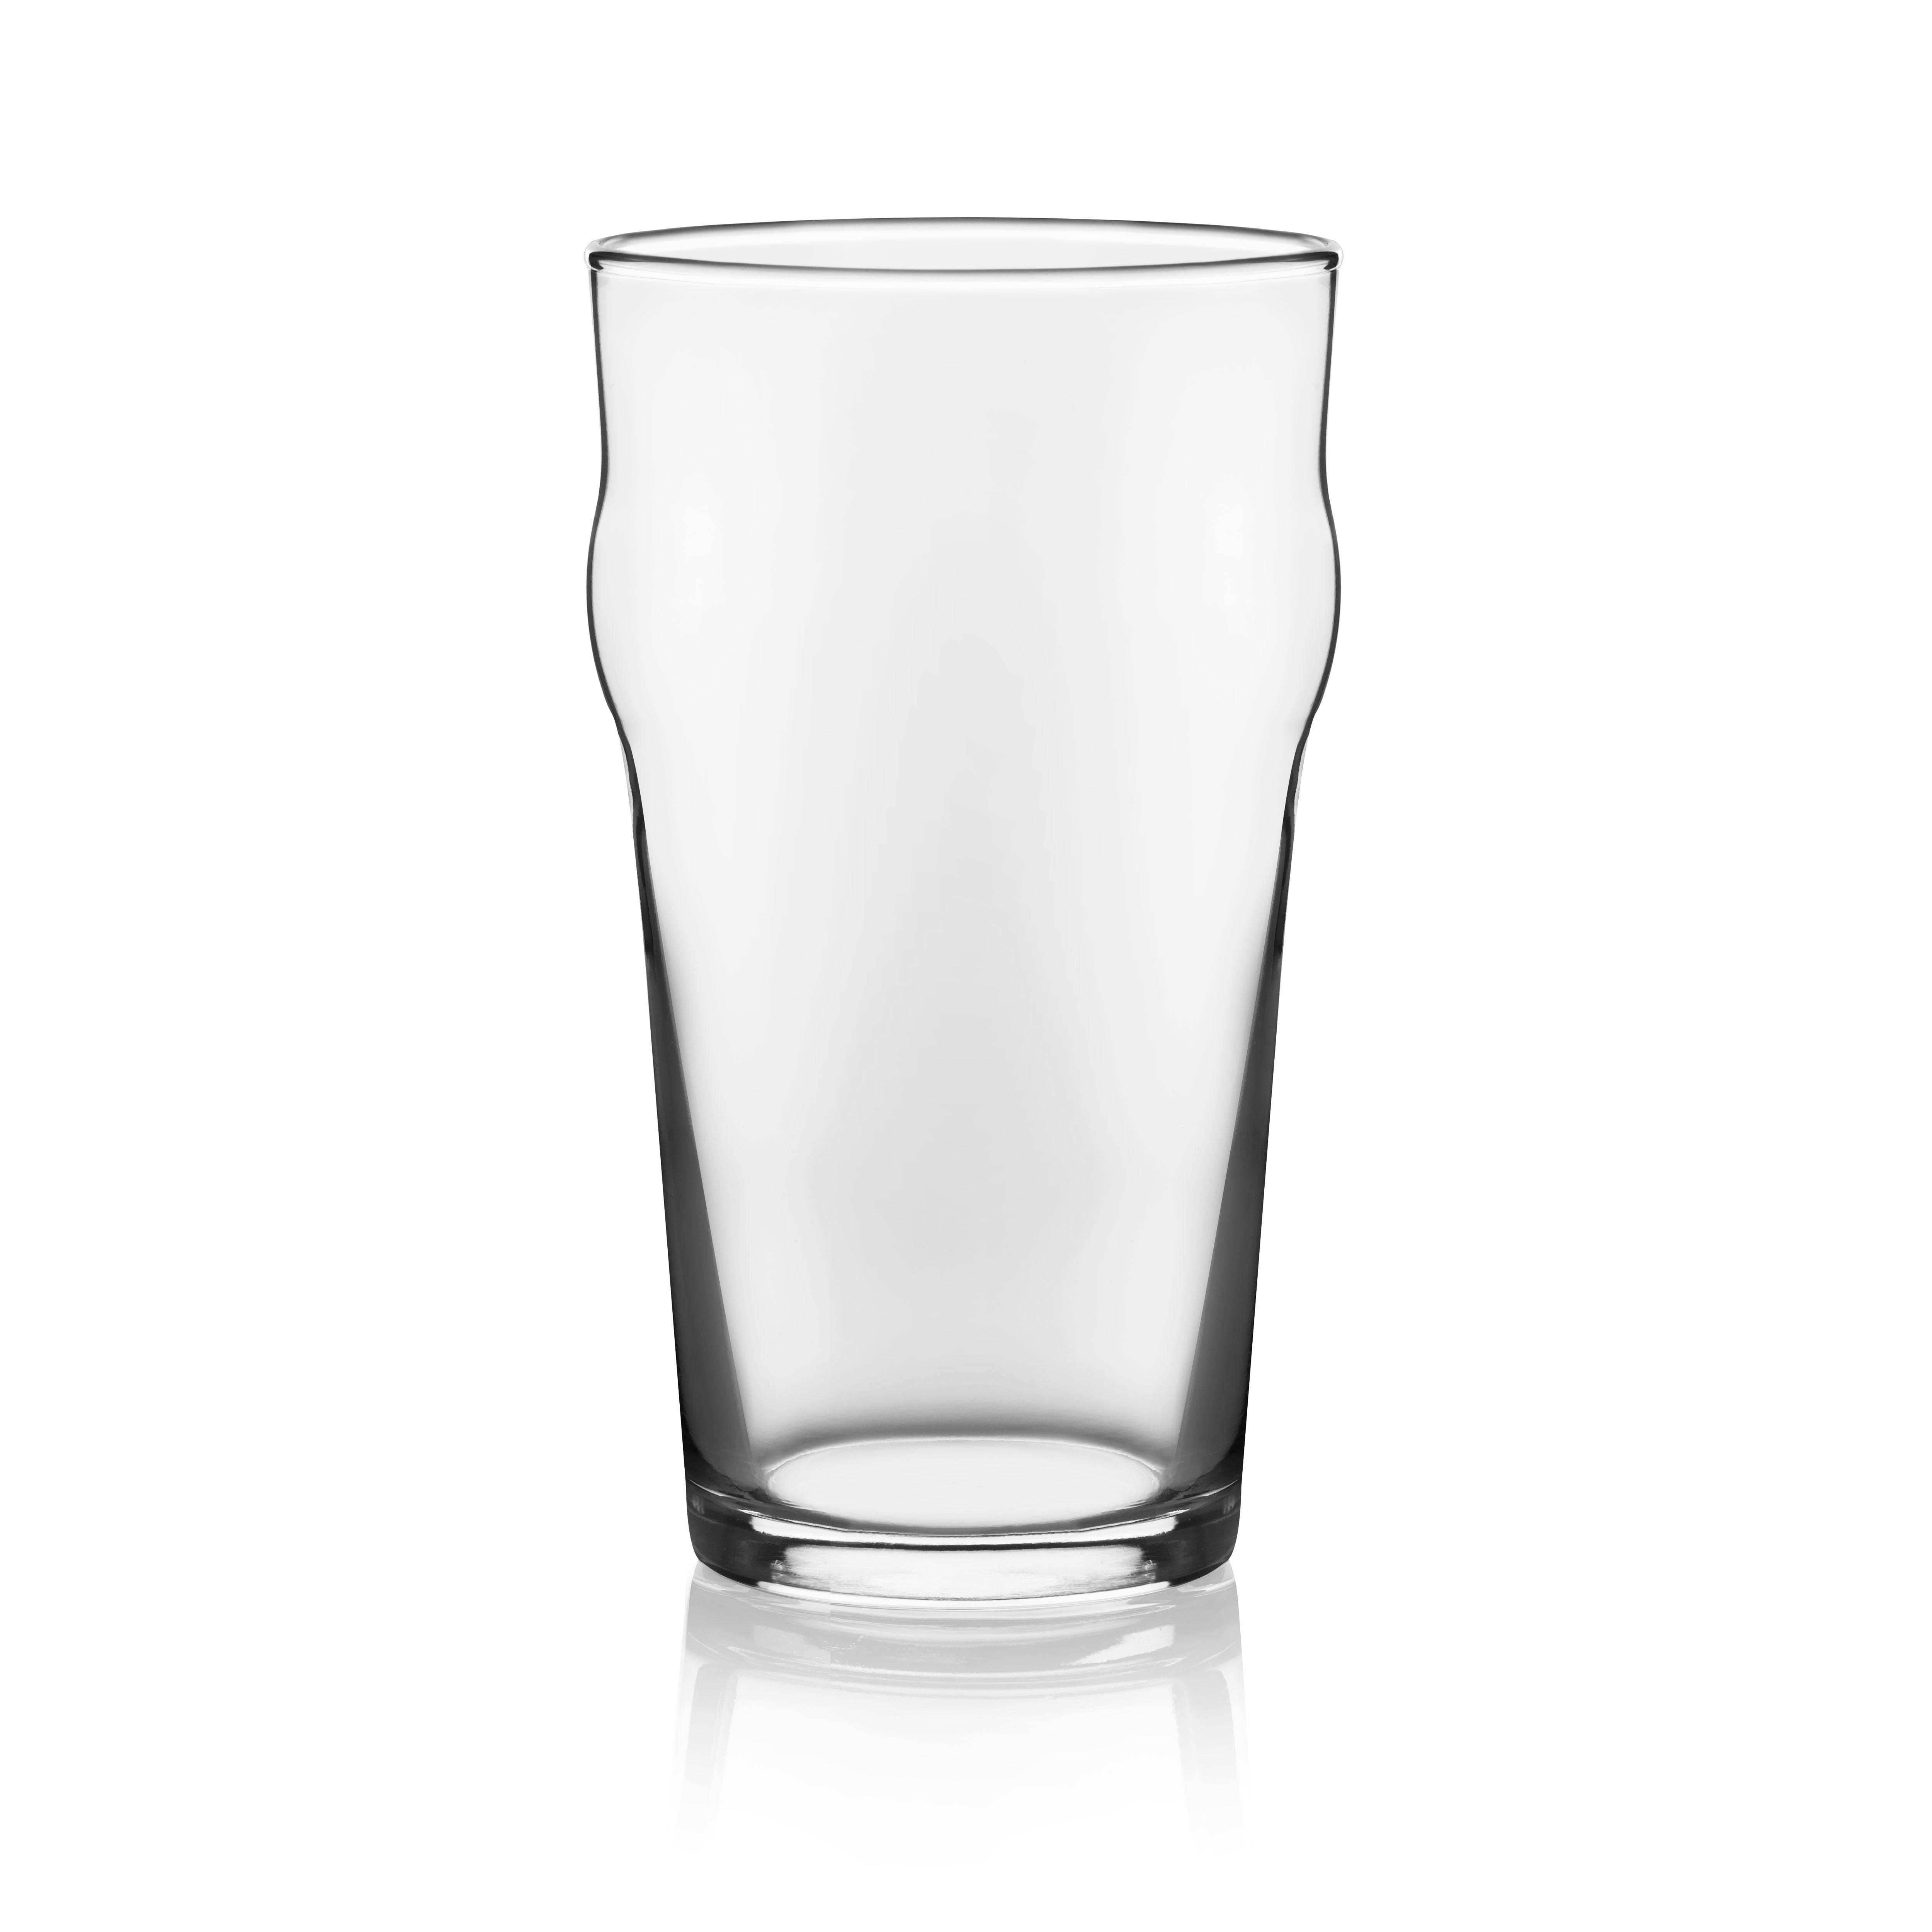 Libbey Craft Brews Nucleated Pint Beer Glasses, 16.75-ounce, Set of 4